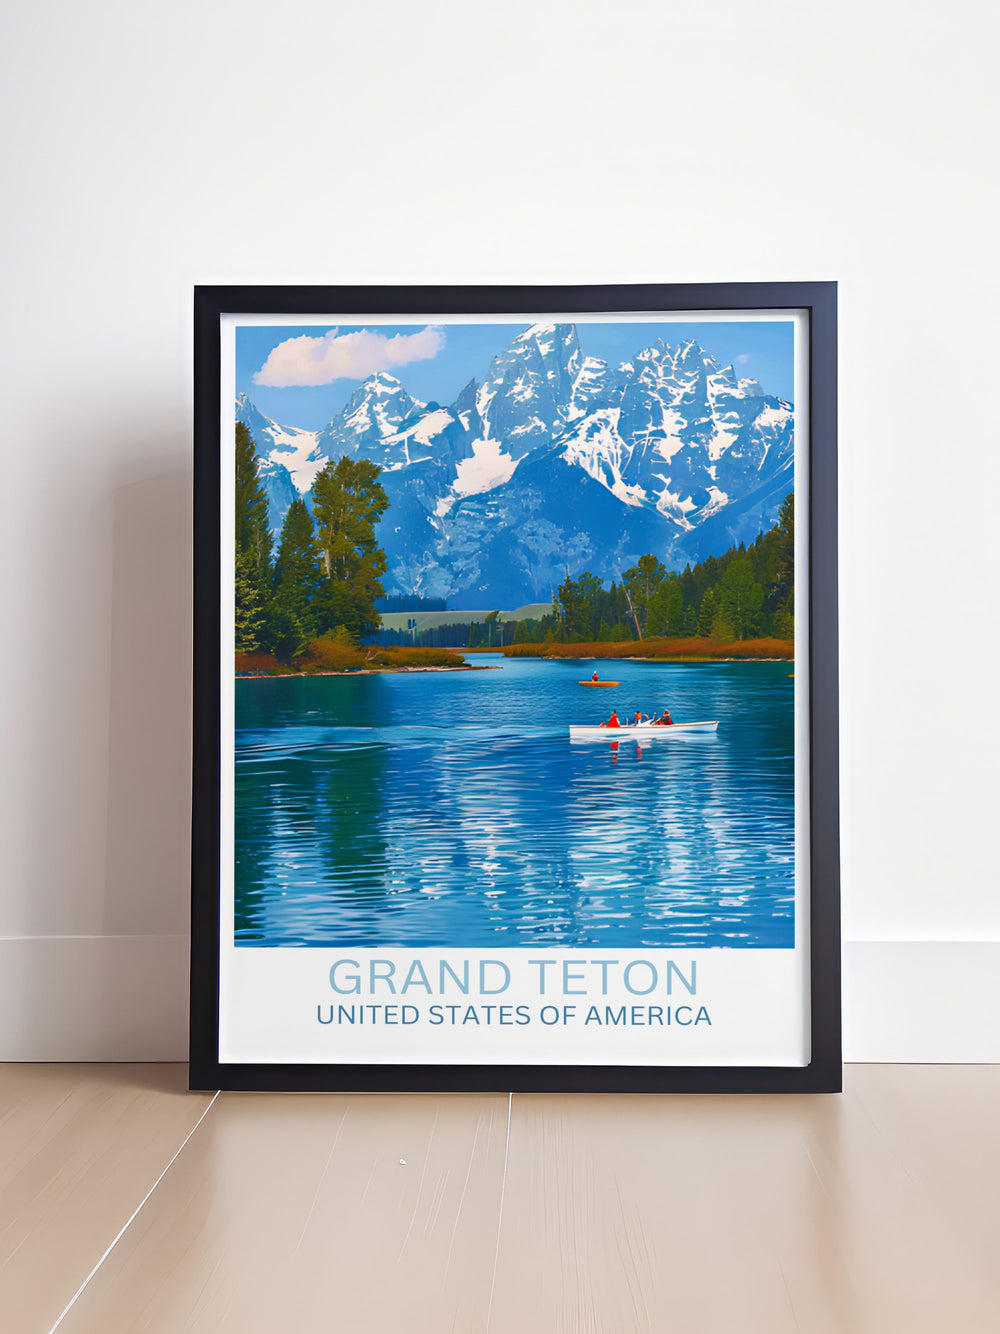 Jackson Lake in the glow of dawn, with soft light casting serene hues over the water, captured beautifully in this wall art.